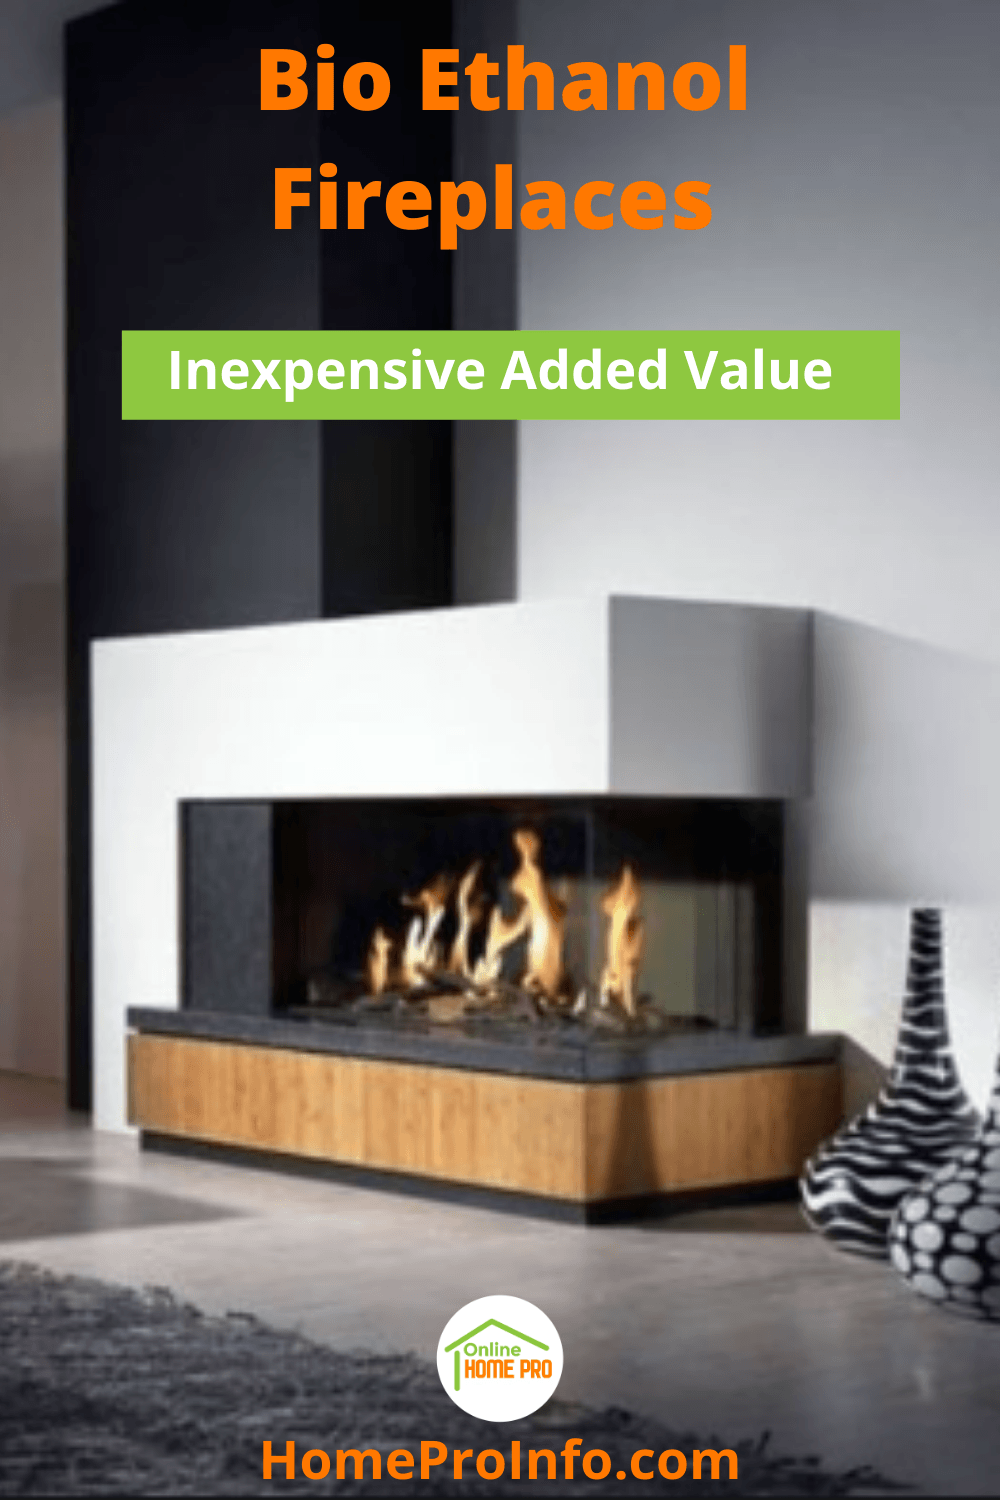 bio ethanol fireplaces for inexpensive added value